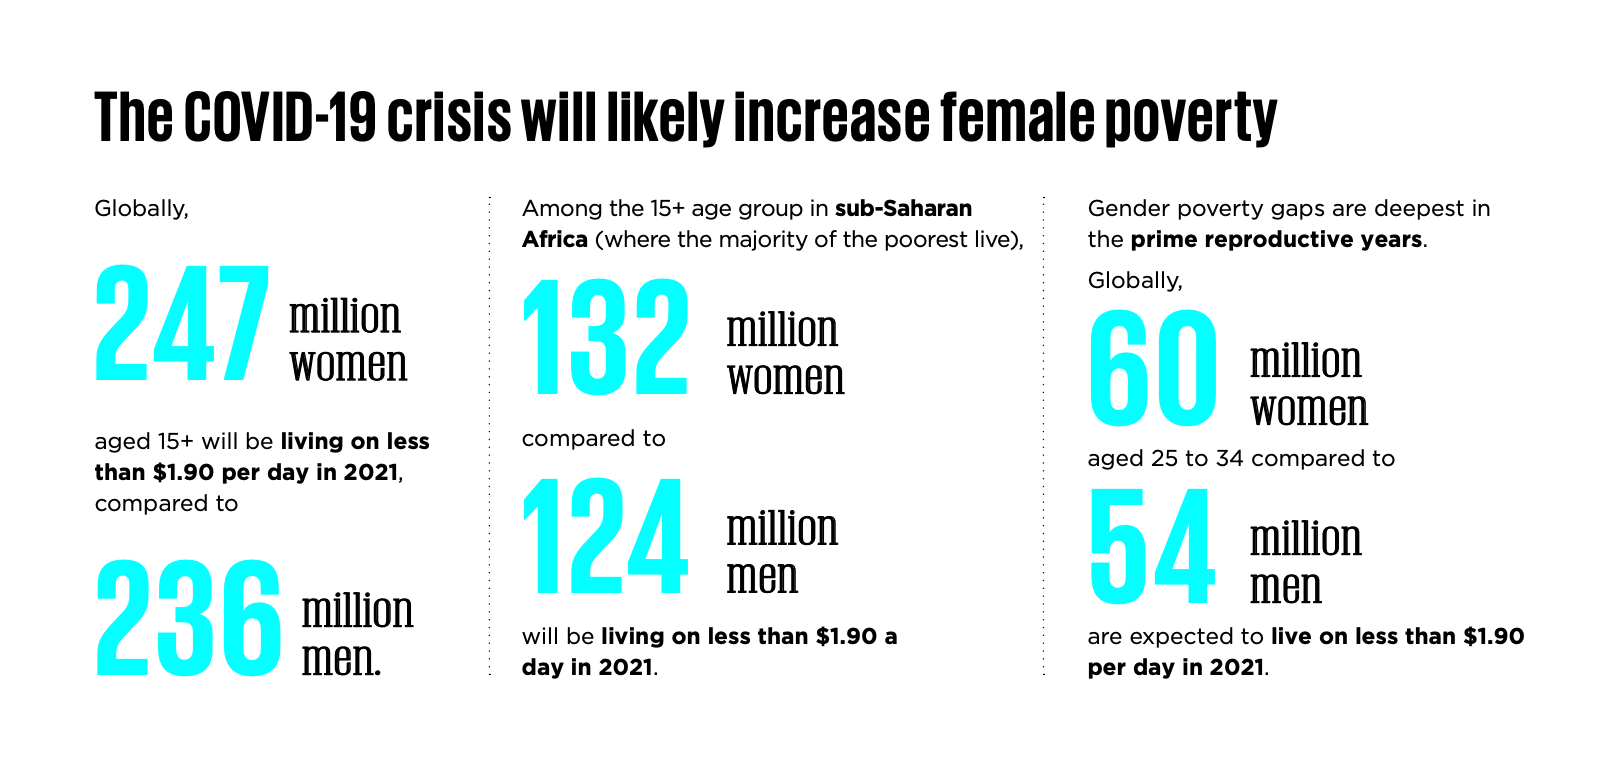 Female poverty rate in South Asia projected to rise due to COVID-19: UN